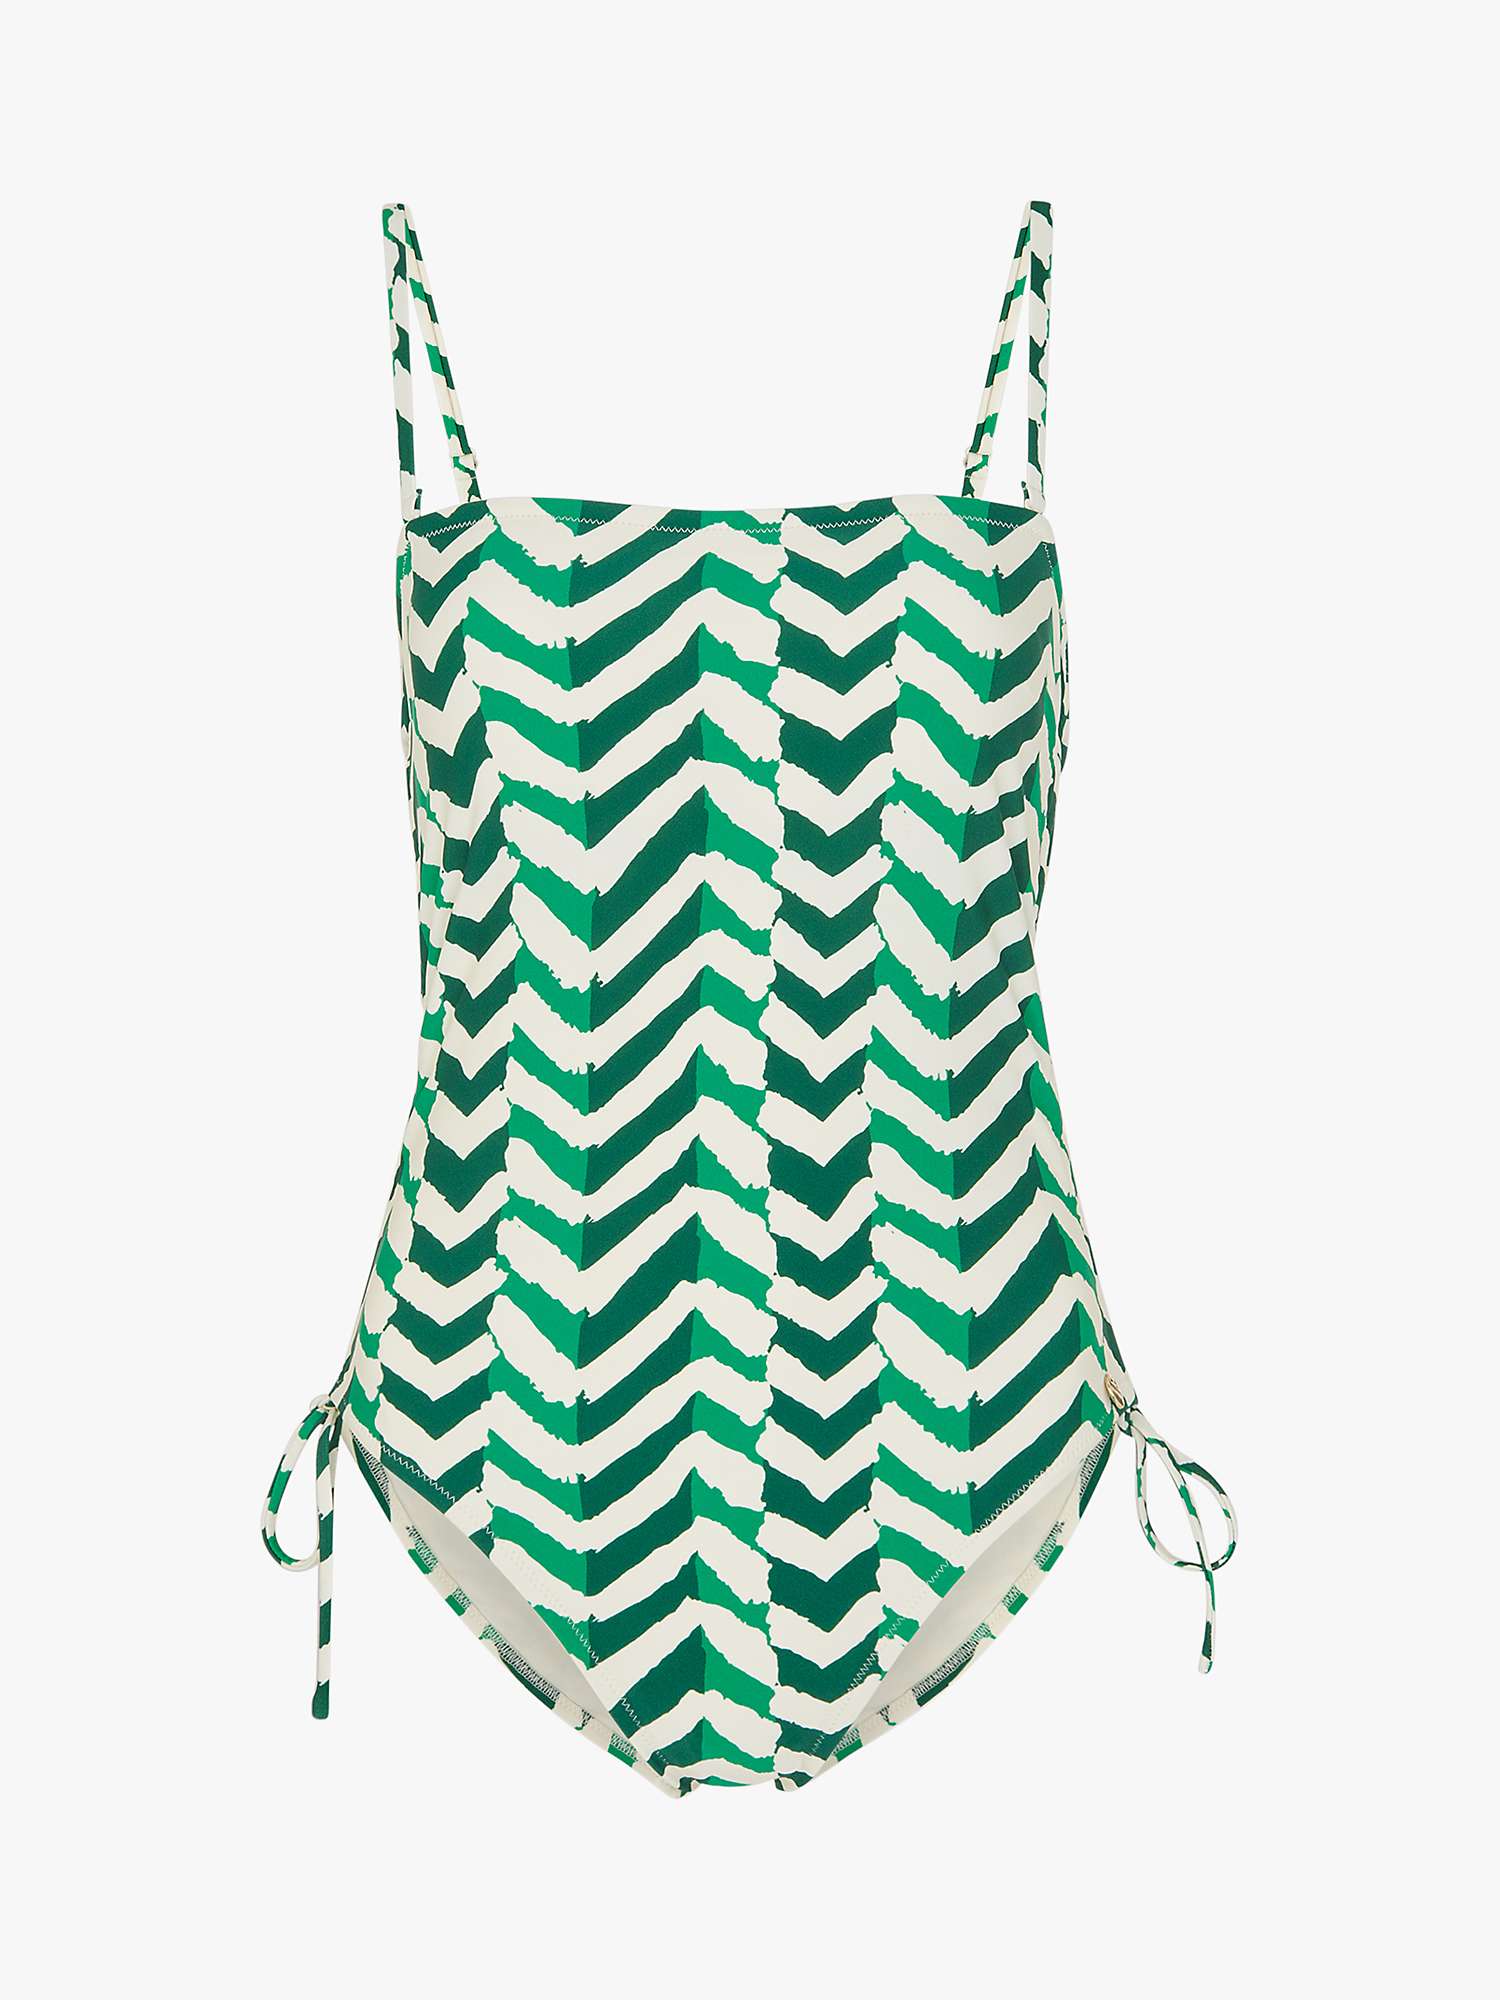 Buy Whistles Chevron Ruched Side Swimsuit, Green/Multi Online at johnlewis.com